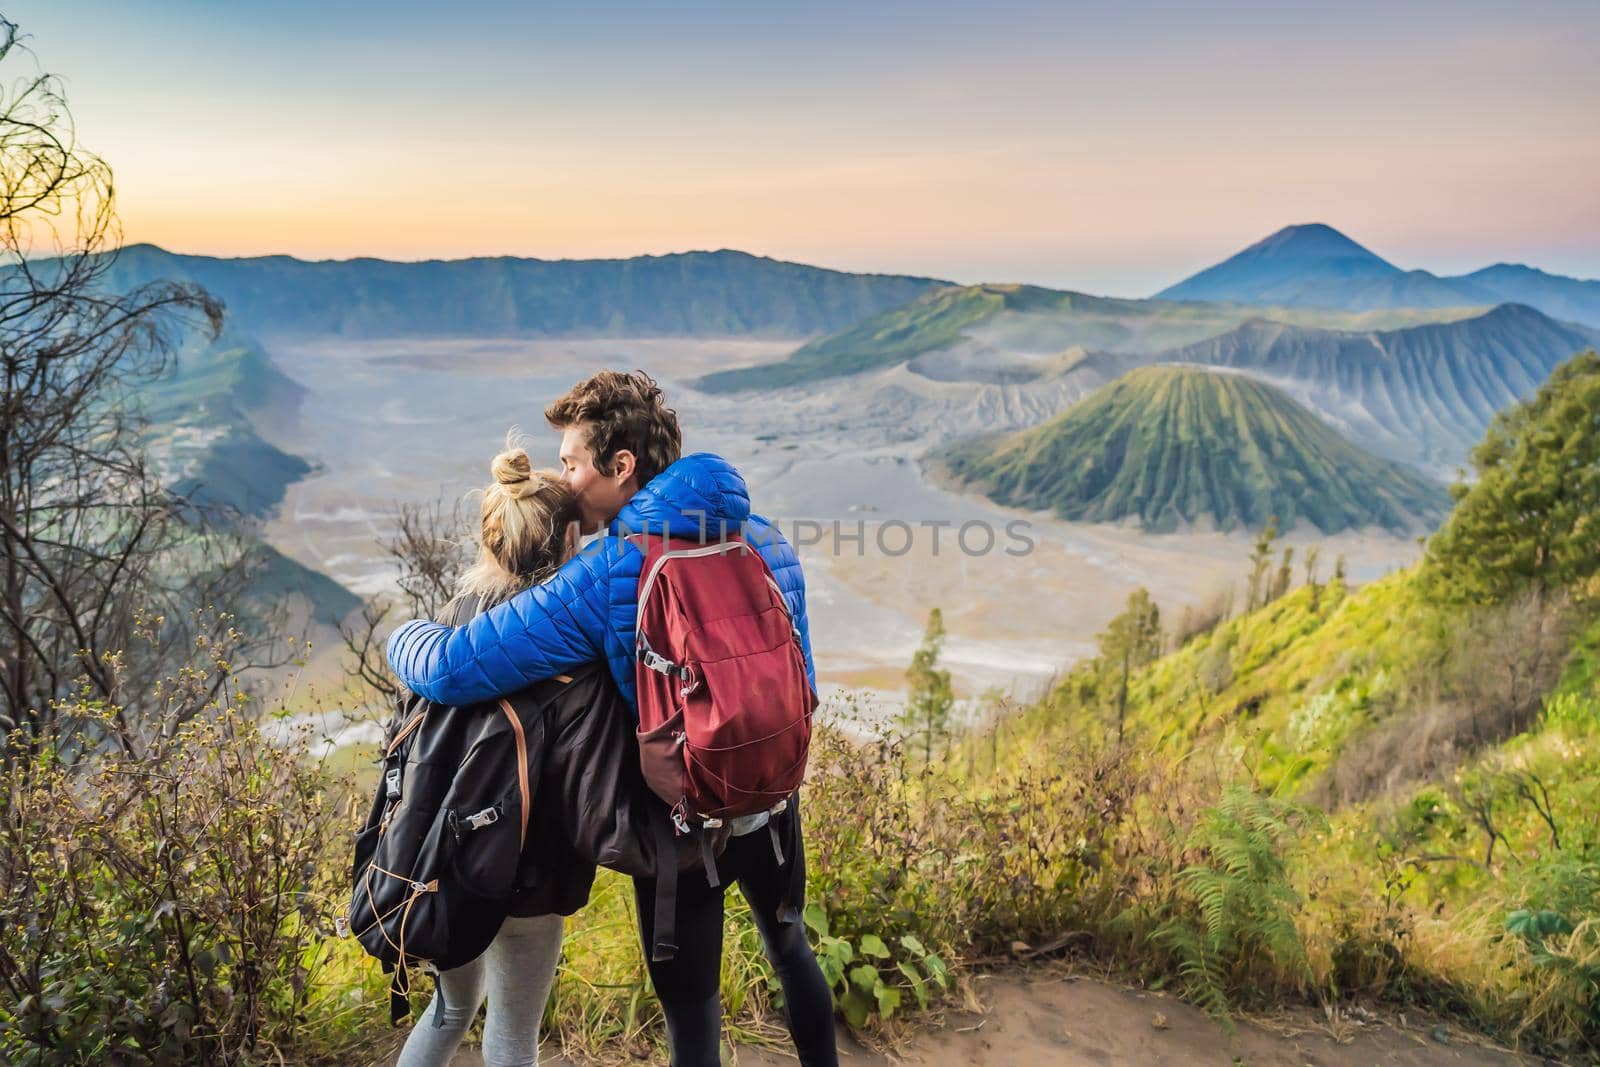 Young couple man and woman meet the sunrise at the Bromo Tengger Semeru National Park on the Java Island, Indonesia. They enjoy magnificent view on the Bromo or Gunung Bromo on Indonesian, Semeru and other volcanoes located inside of the Sea of Sand within the Tengger Caldera. One of the most famous volcanic objects in the world. Travel to Indonesia concept by galitskaya